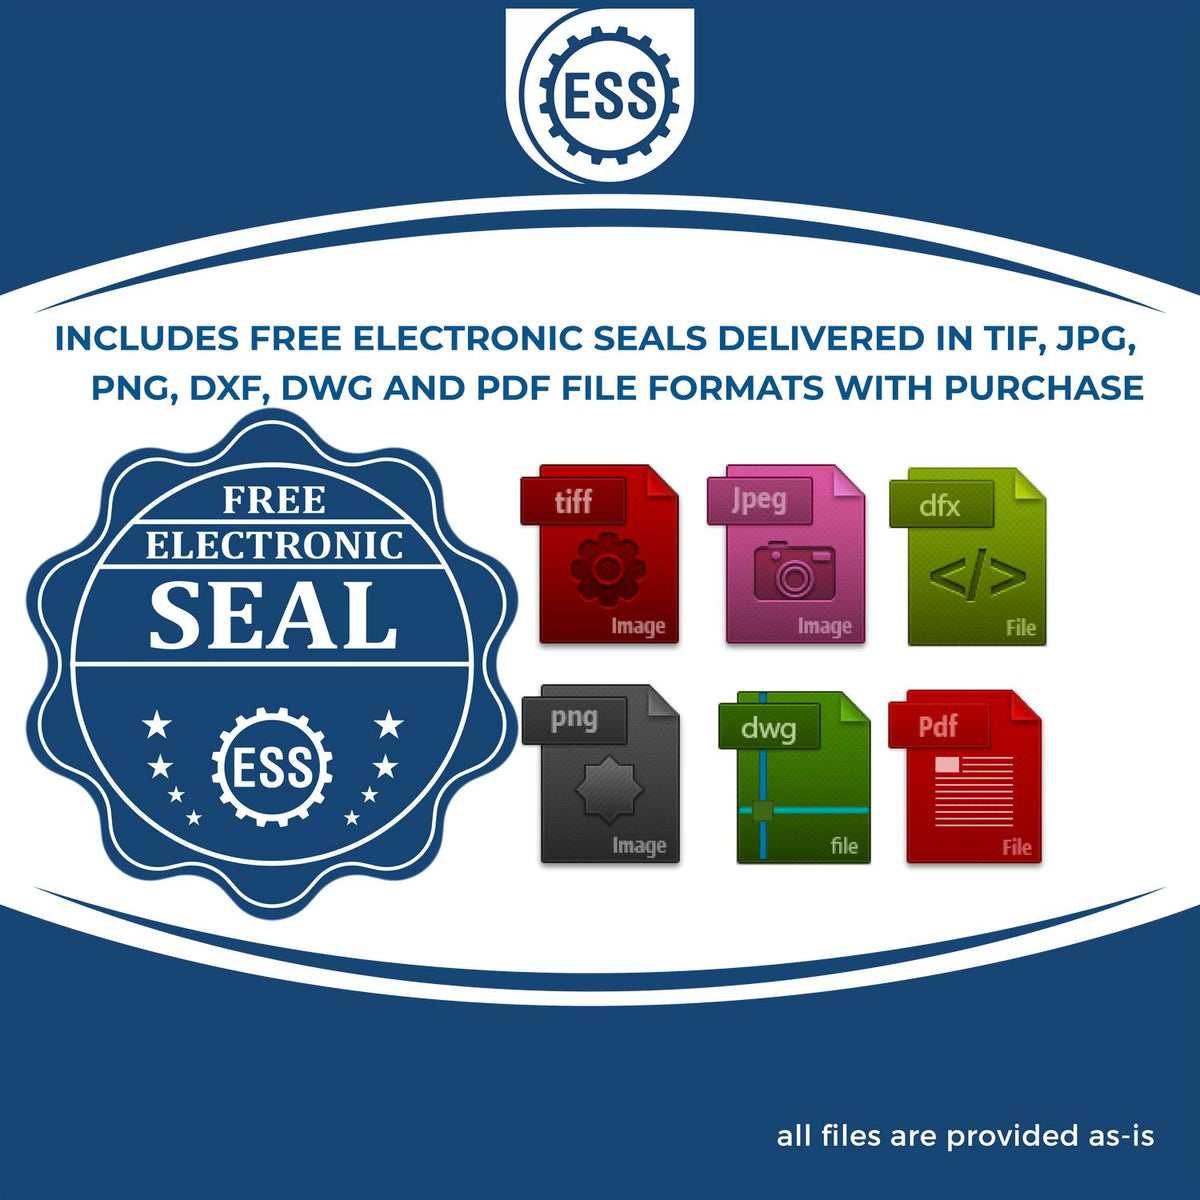 An infographic for the free electronic seal for the Hybrid Oklahoma Engineer Seal illustrating the different file type icons such as DXF, DWG, TIF, JPG and PNG.